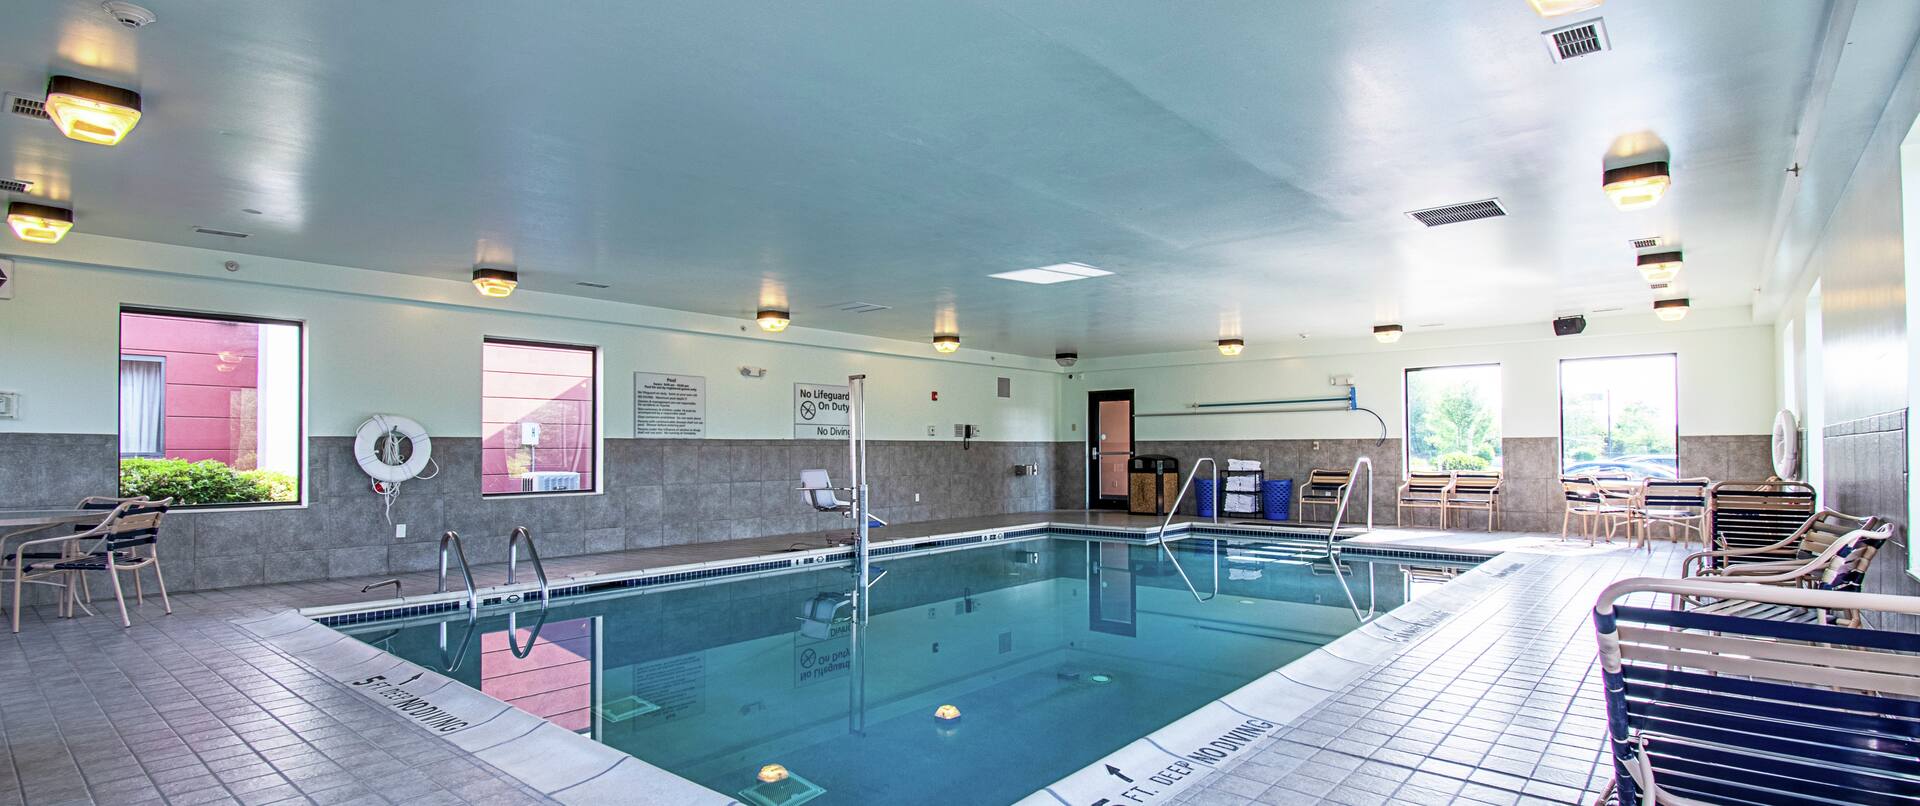 Indoor pool with seating